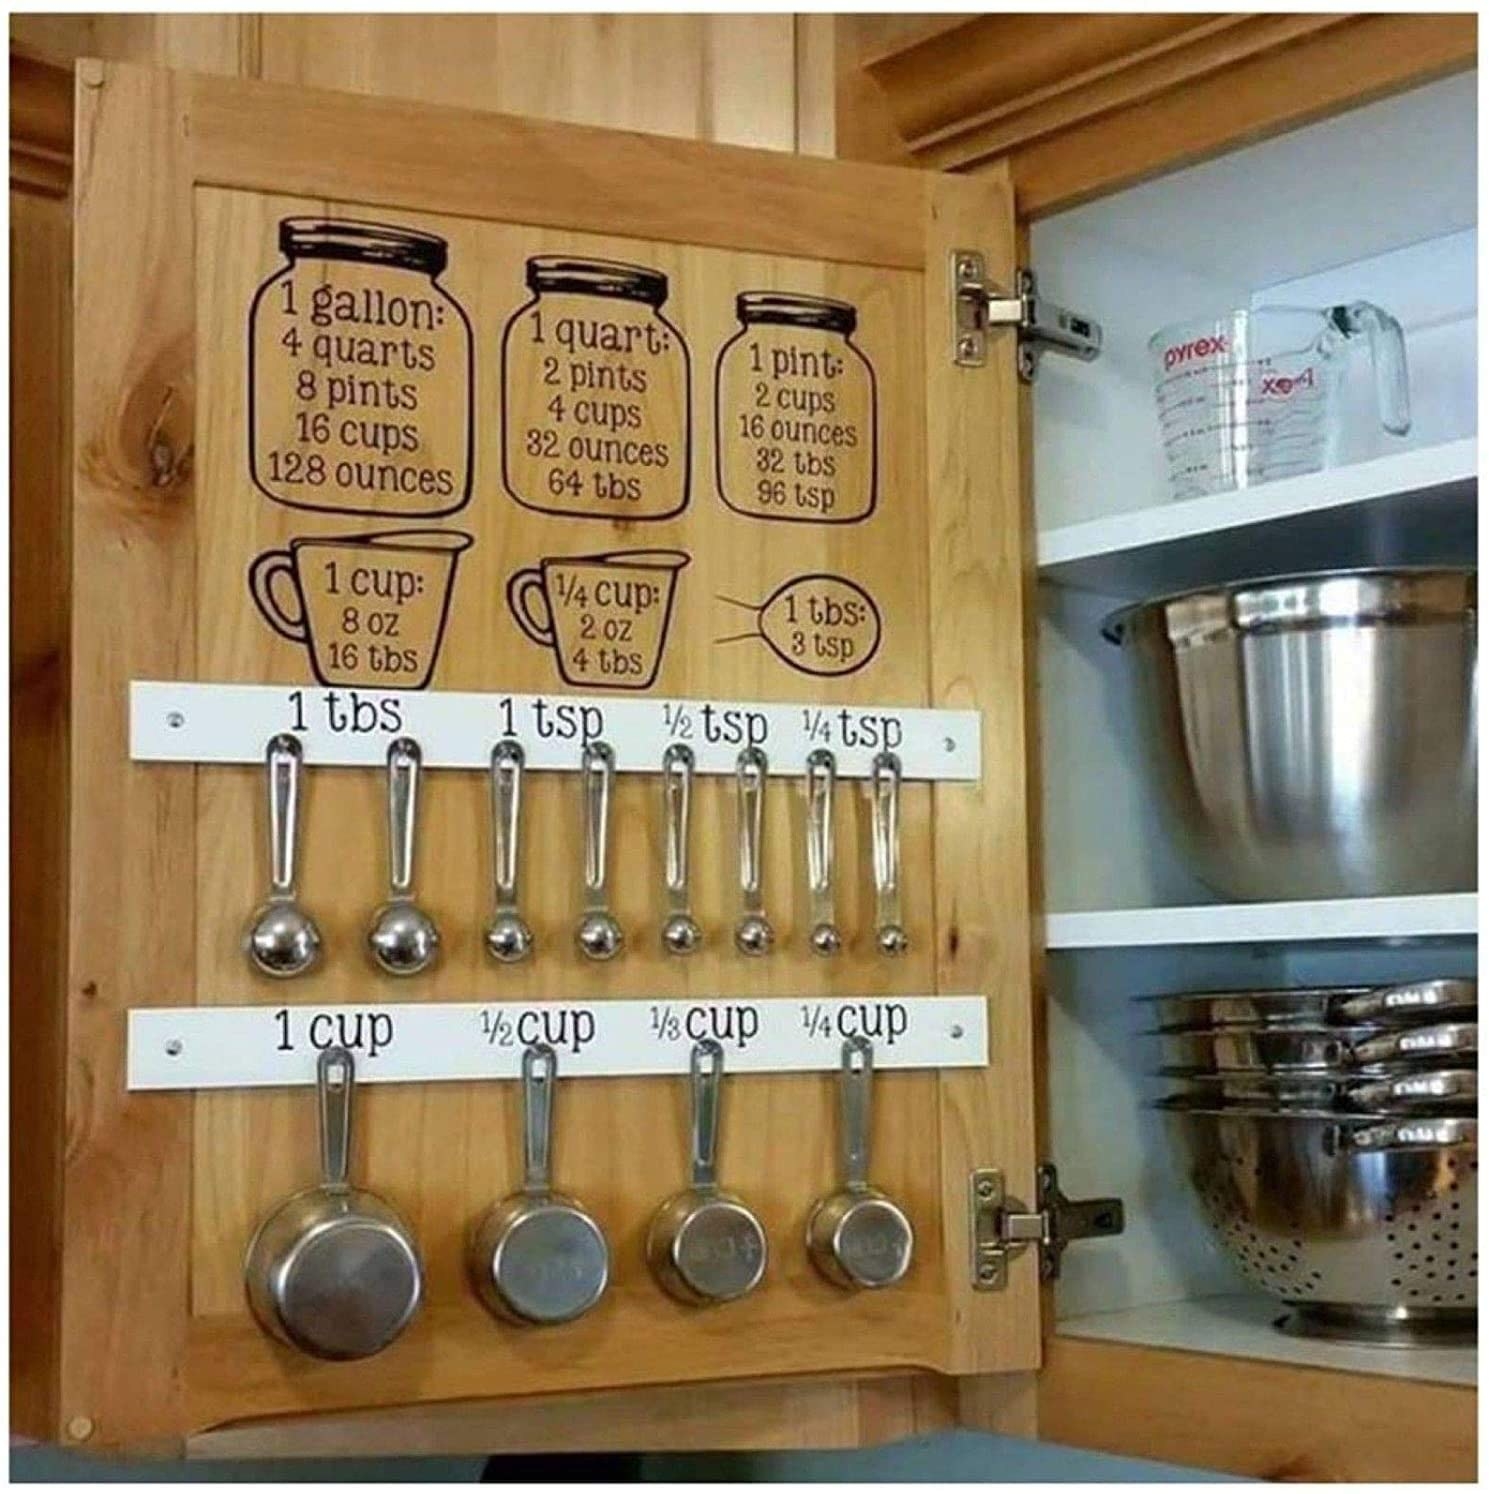 inside of a kitchen cabinet with the decals and measuring cups hanging.